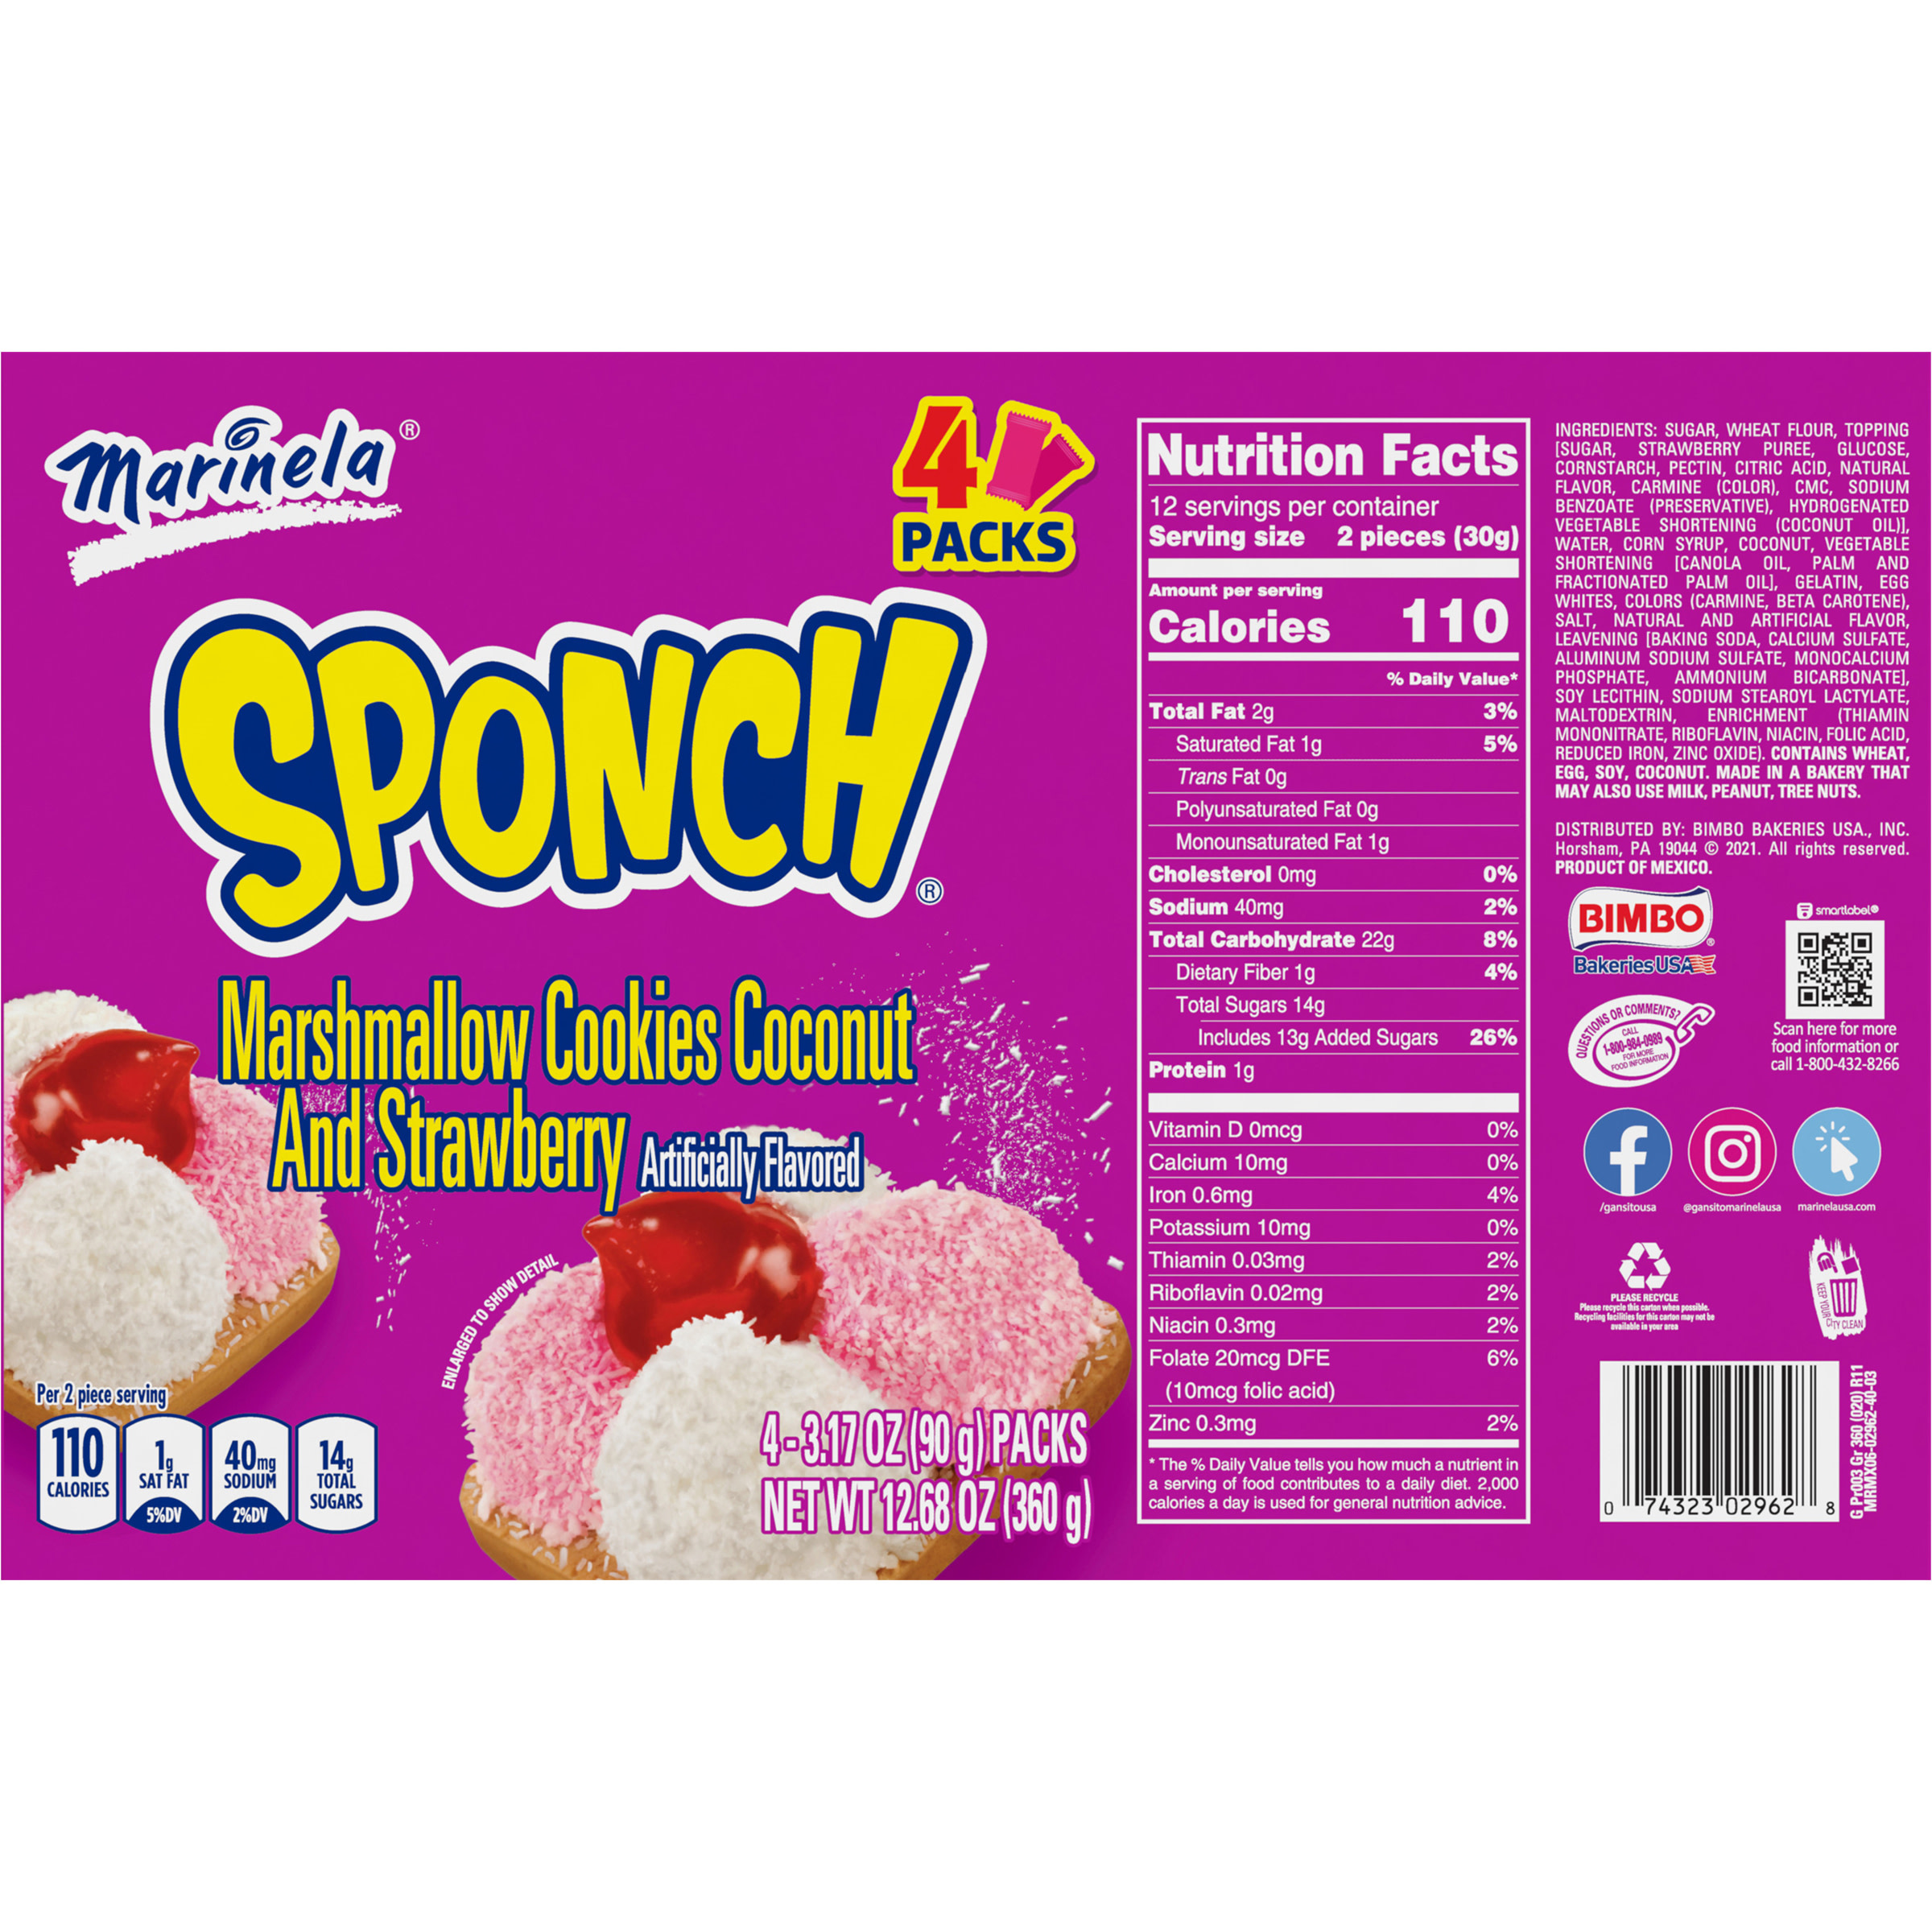 Marinela Sponch Marshmallow Cookies, 4 count, 12.68 oz - image 3 of 7